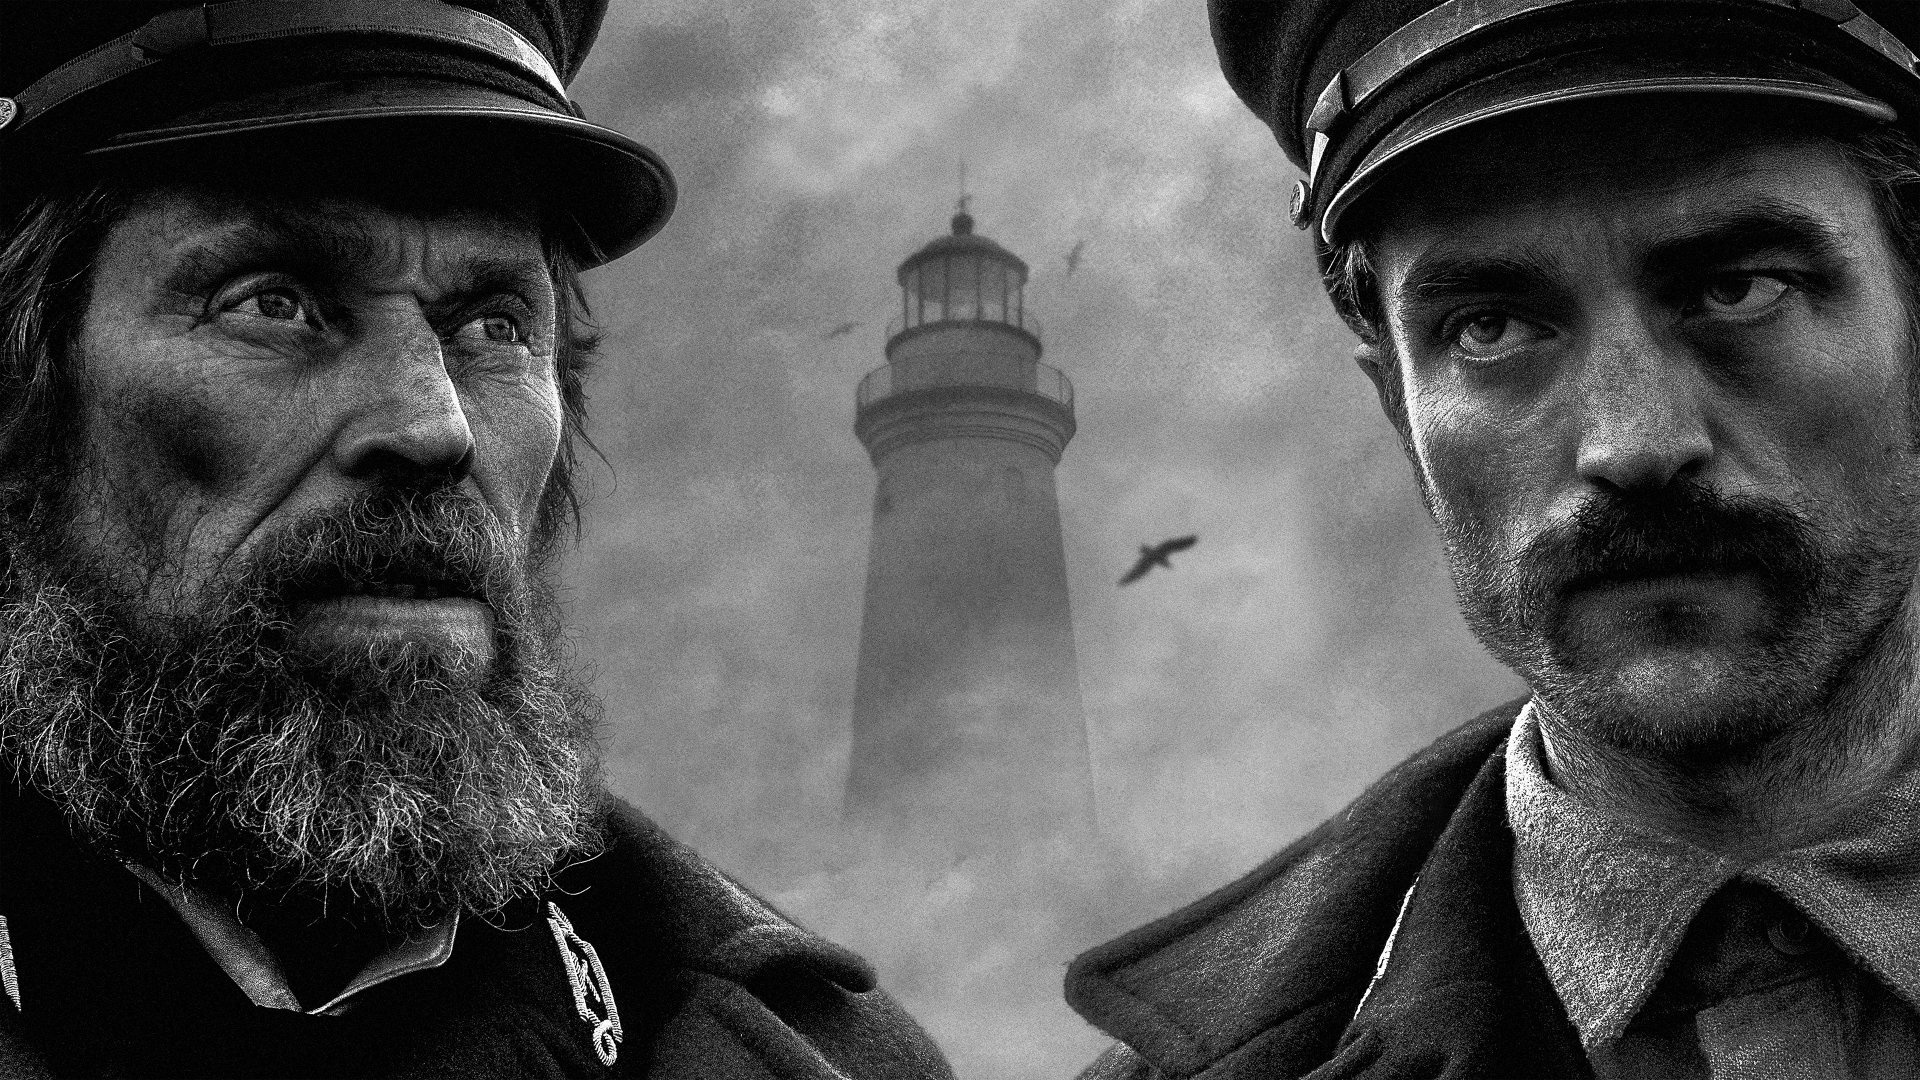 The Lighthouse, Film wallpapers, Backgrounds, 1920x1080 Full HD Desktop